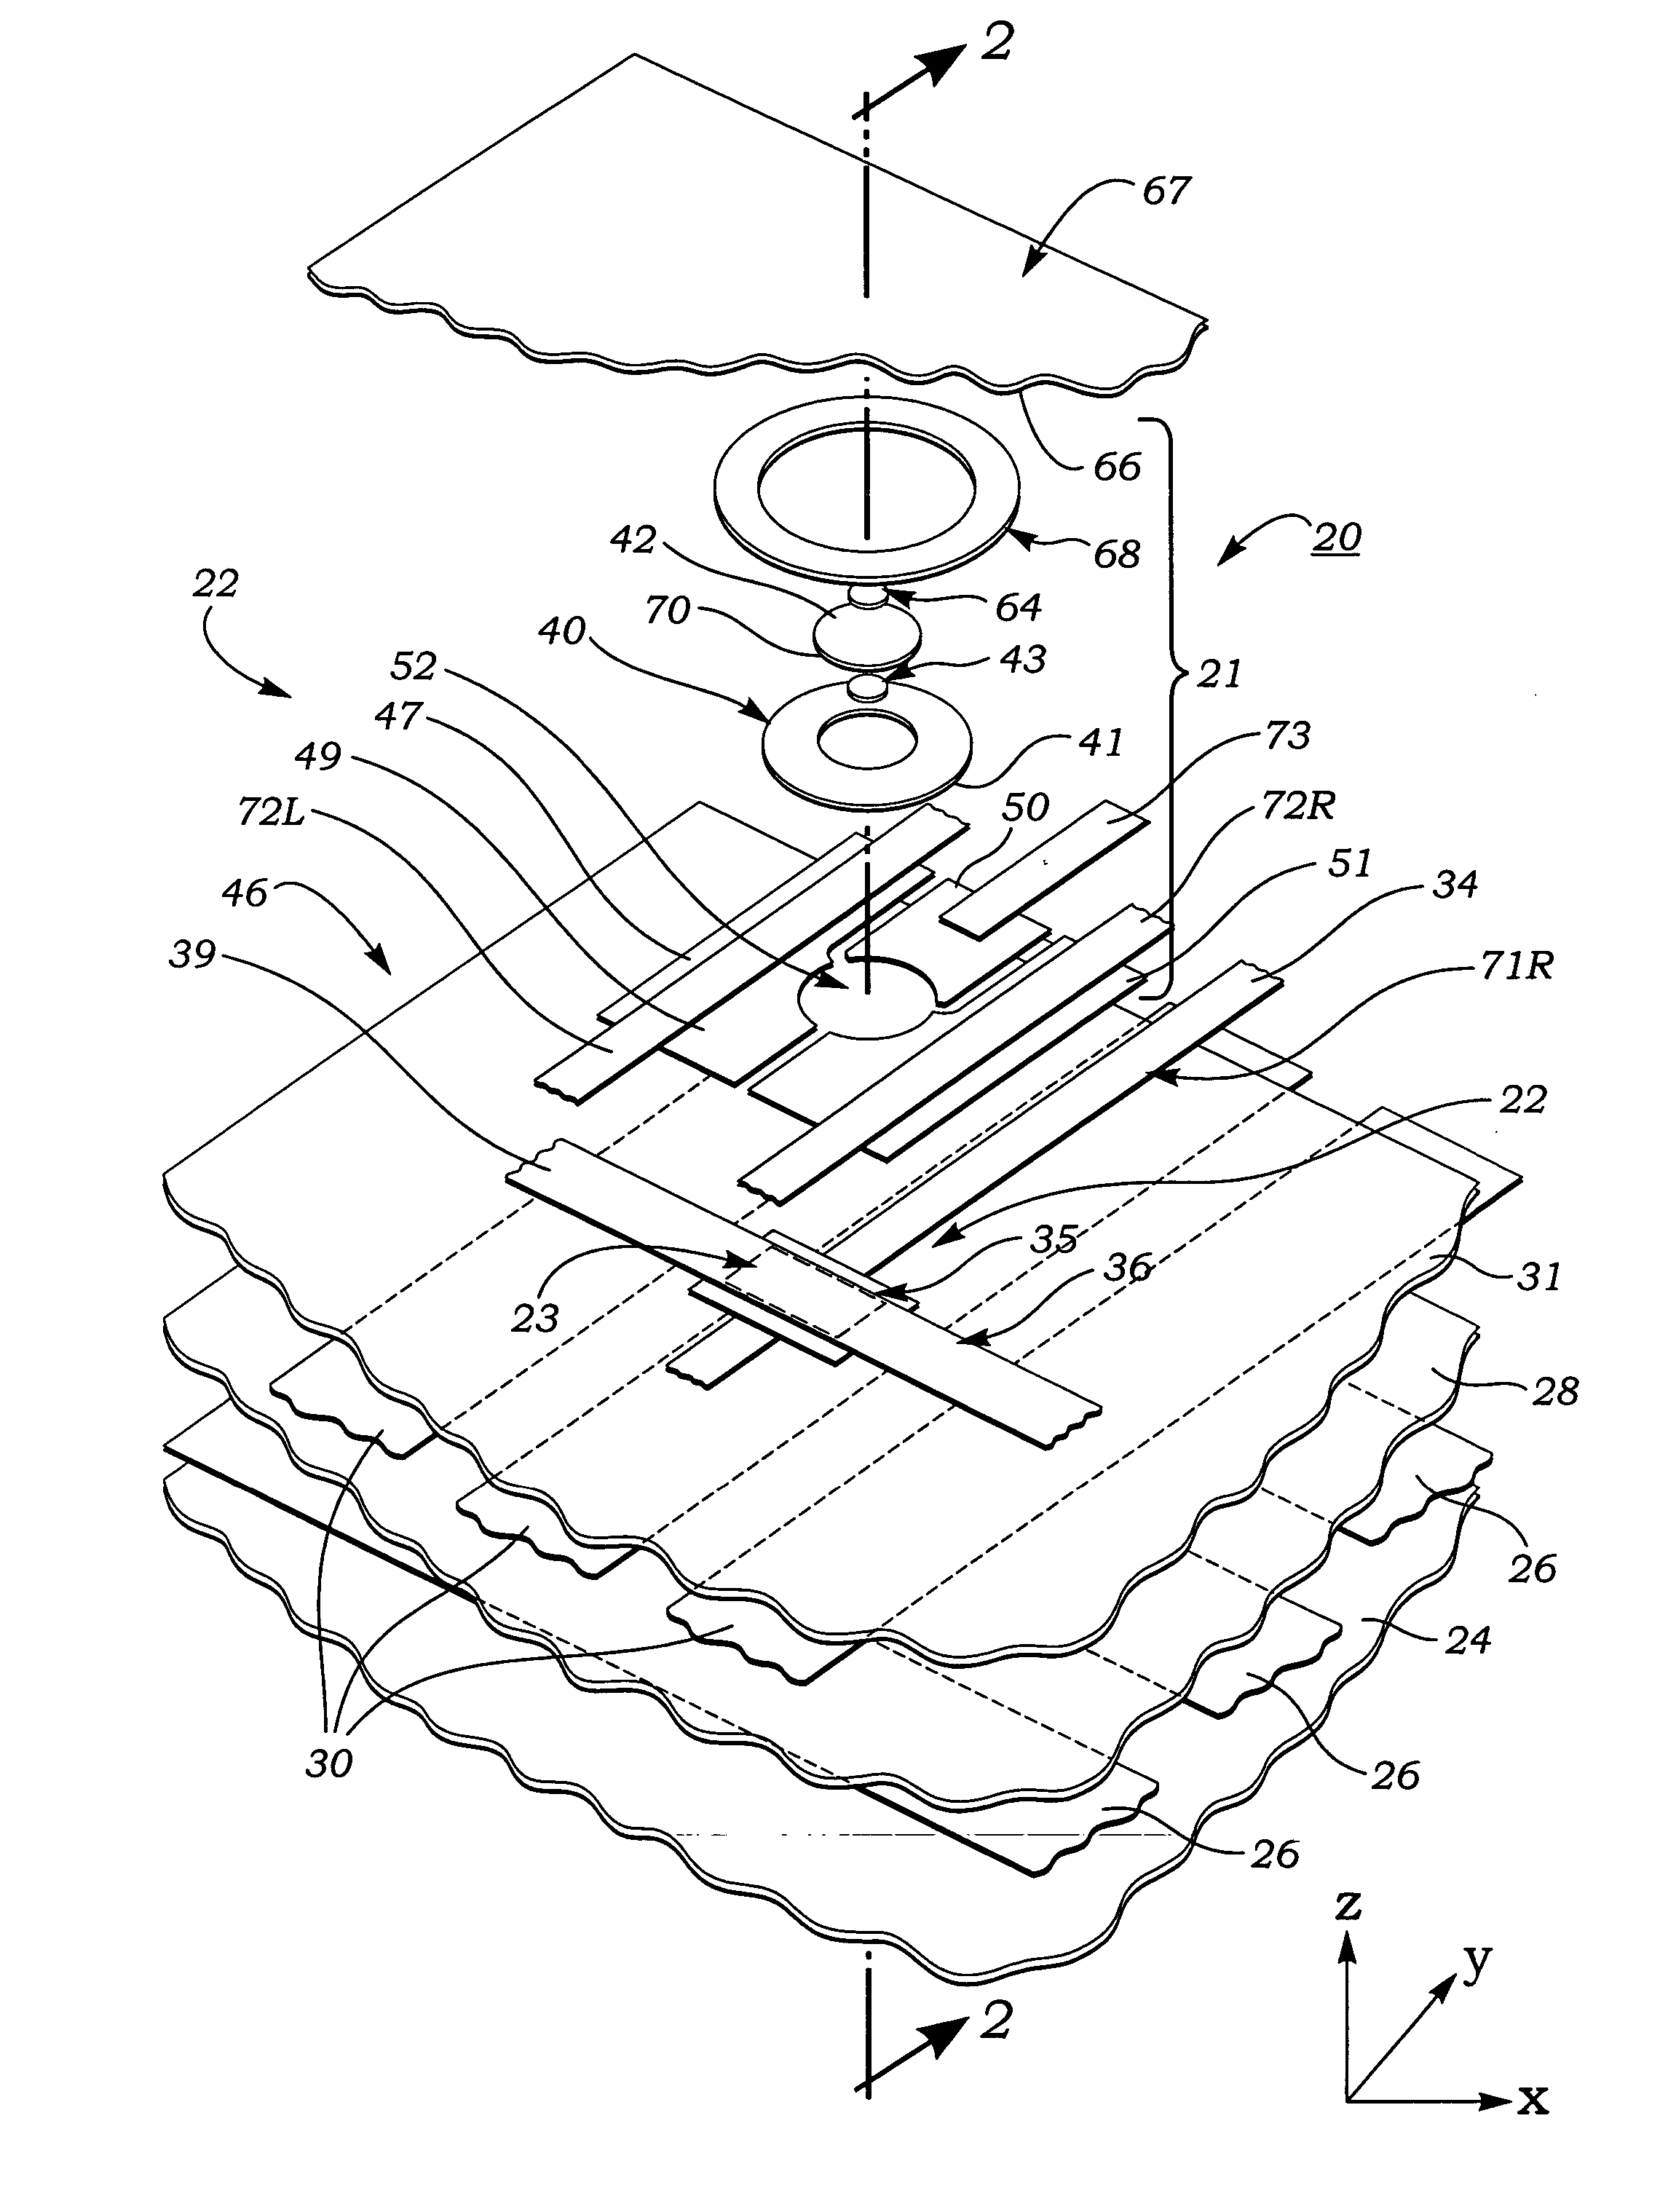 Normal force gradient/shear force sensors and method of measuring internal biological tissue stress